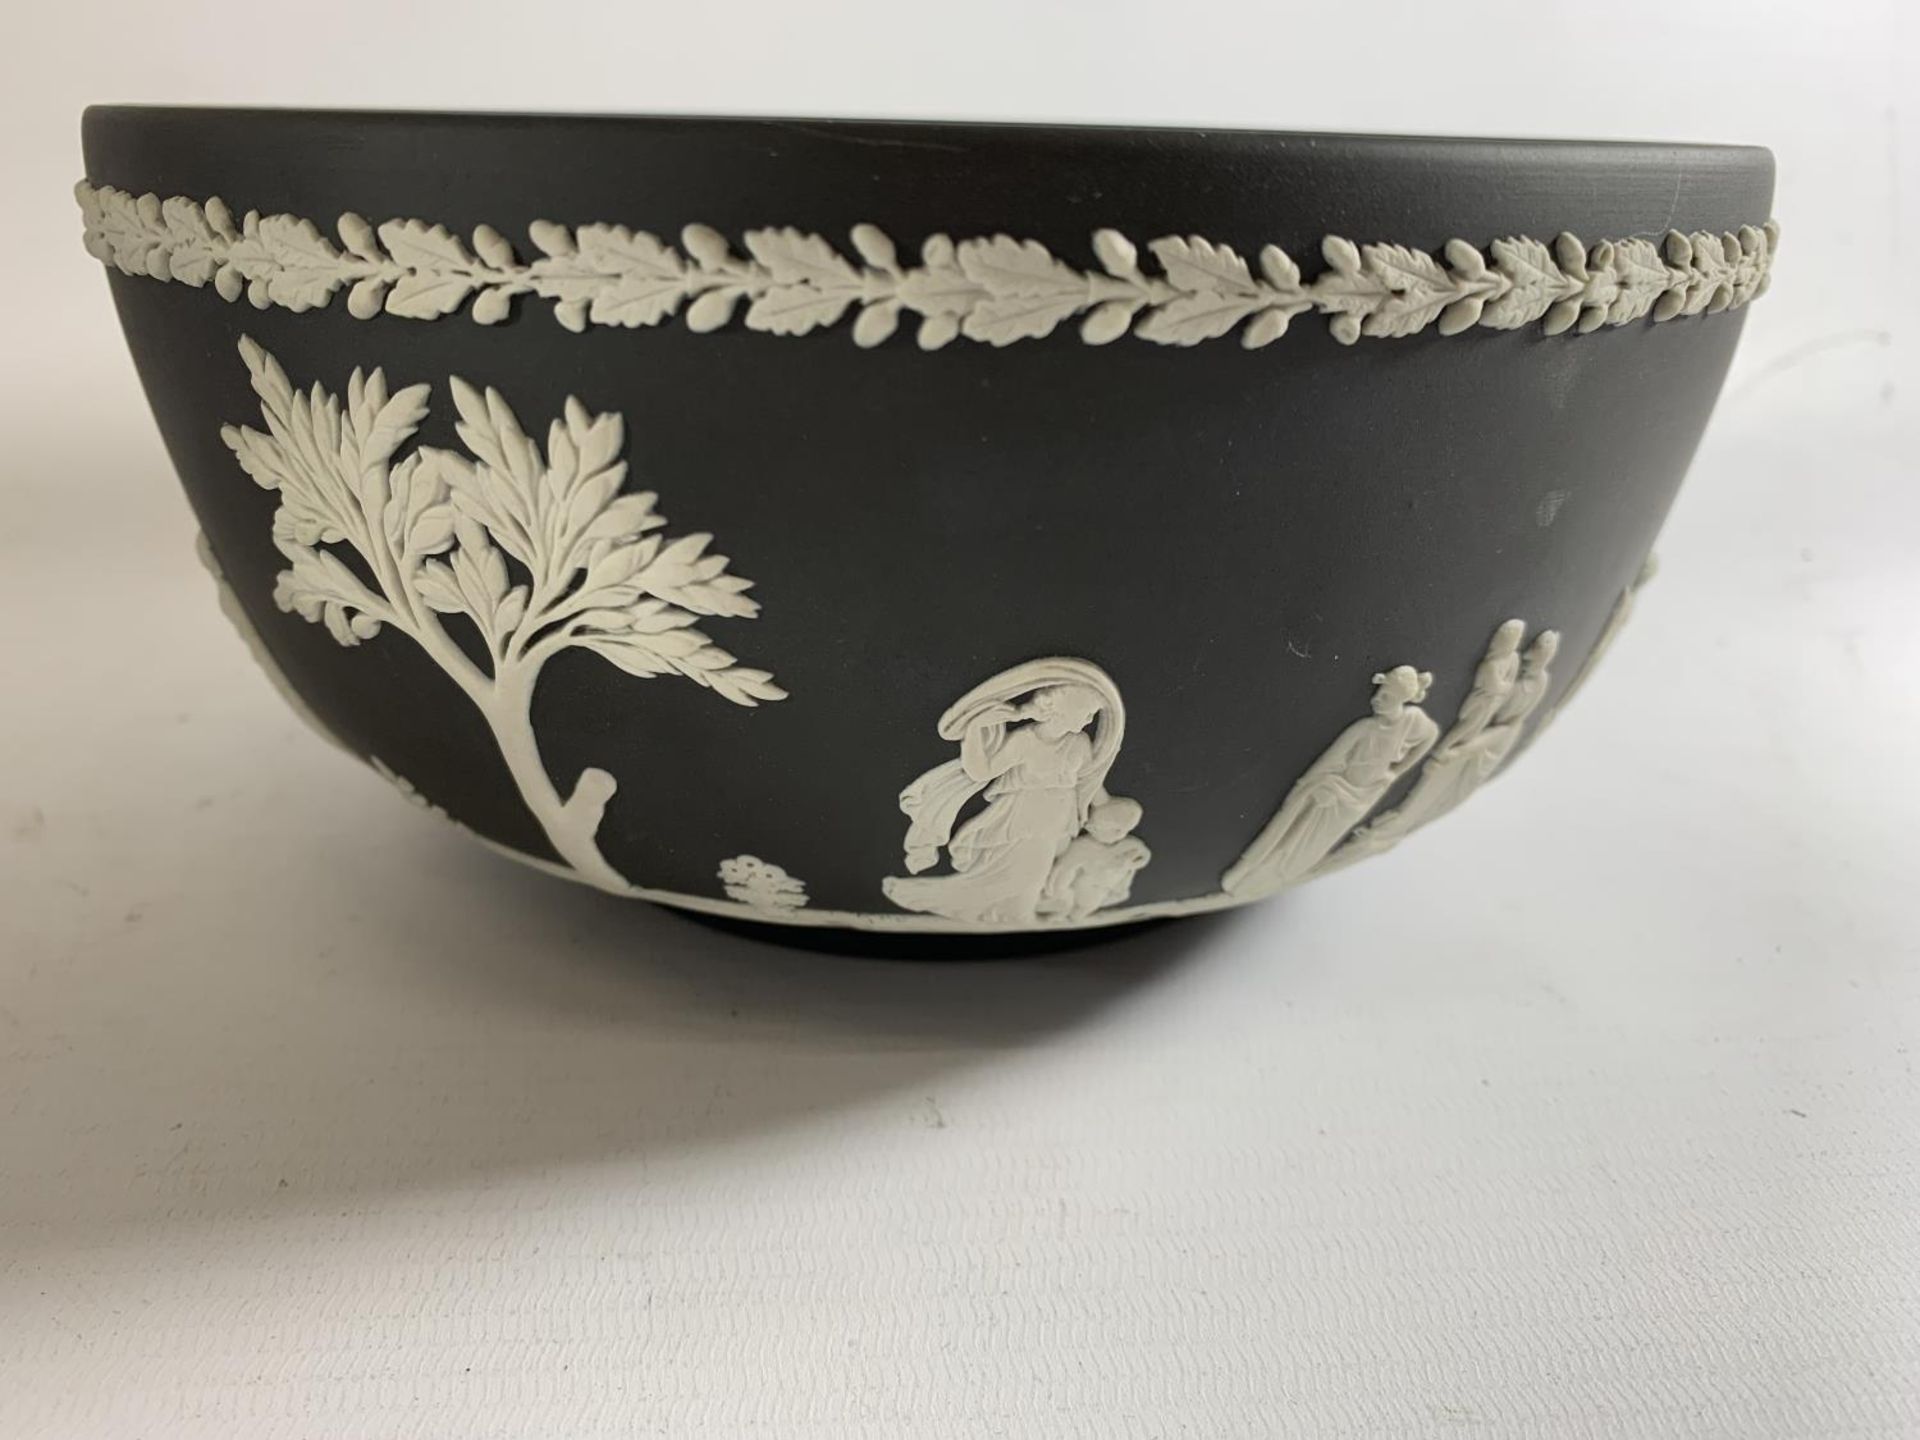 * A BOXED PRESENTATION BLACK JASPERWARE BOWL, THE BOWL PRESENTED BY THE JOINT CENTRAL COMMITTEE OF